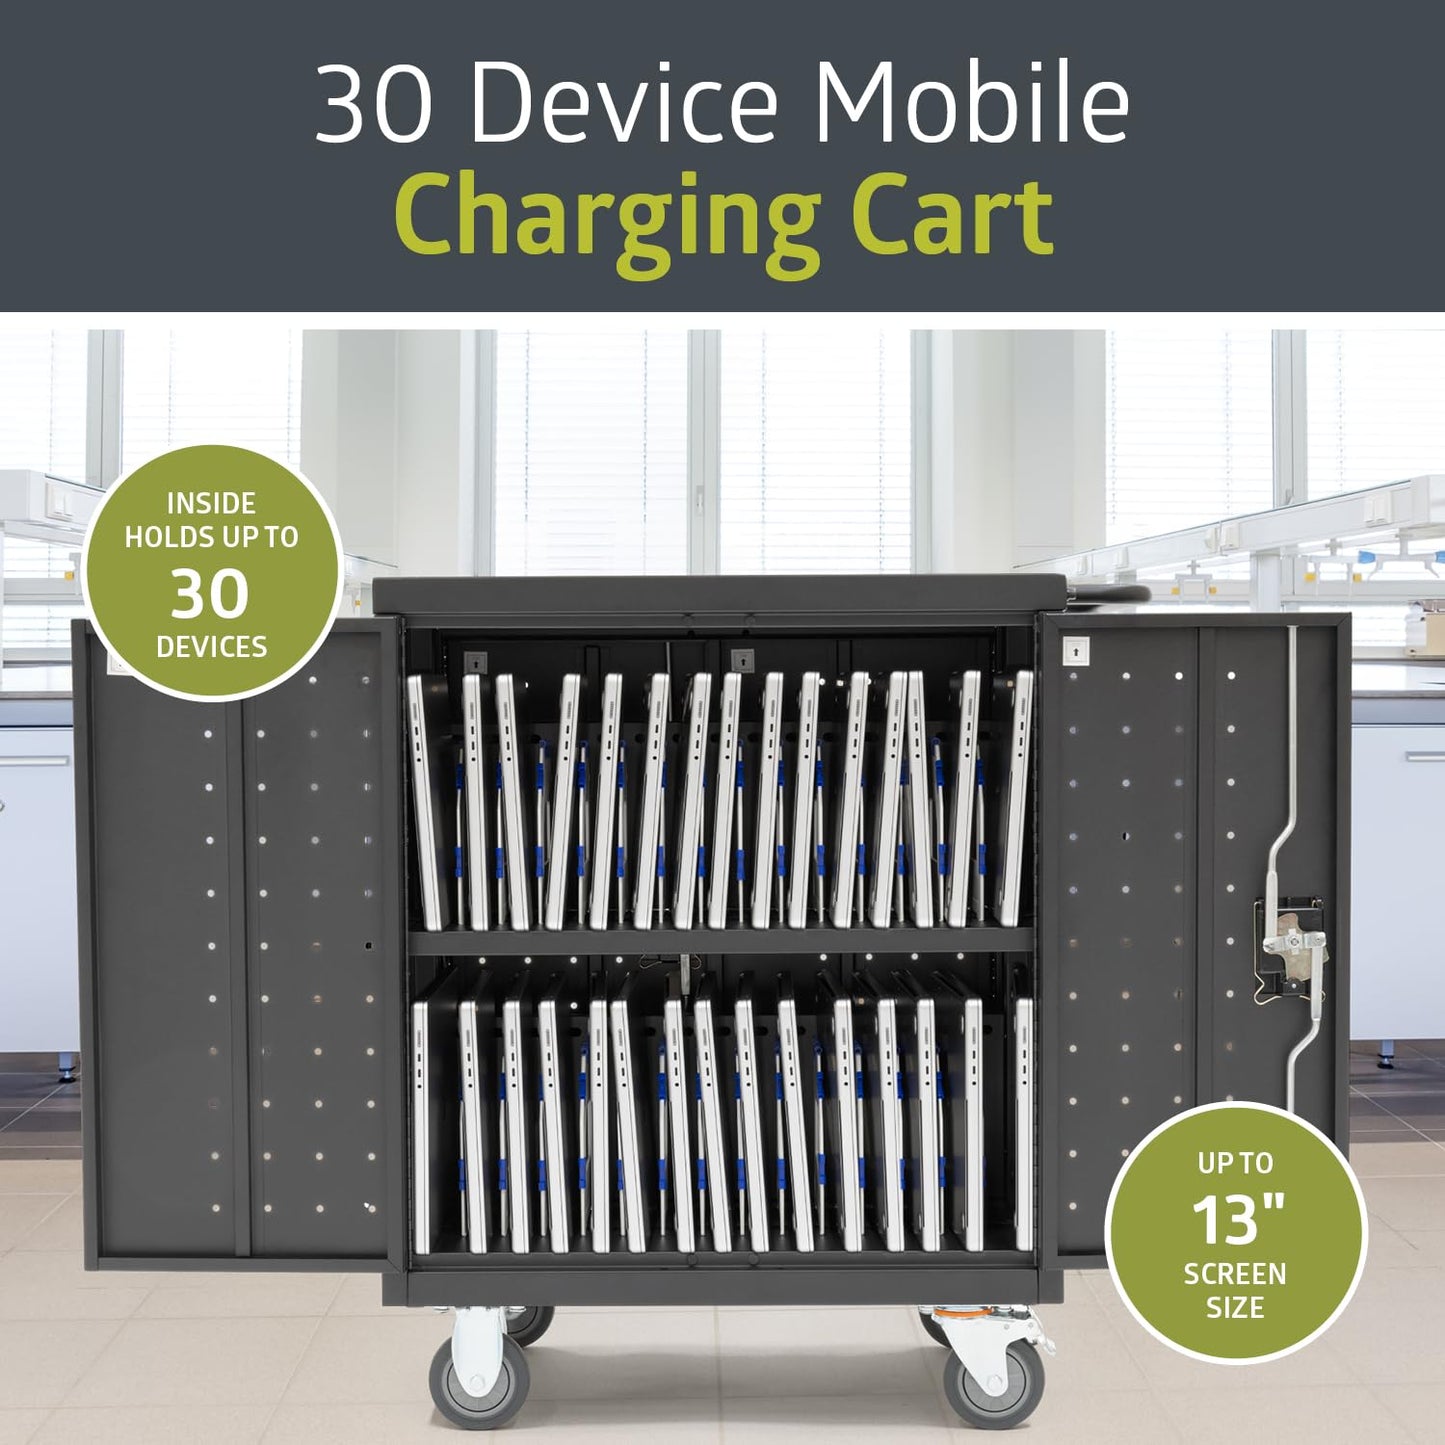 Fuerza 30 Device Mobile Charging w/cord management - SchoolOutlet